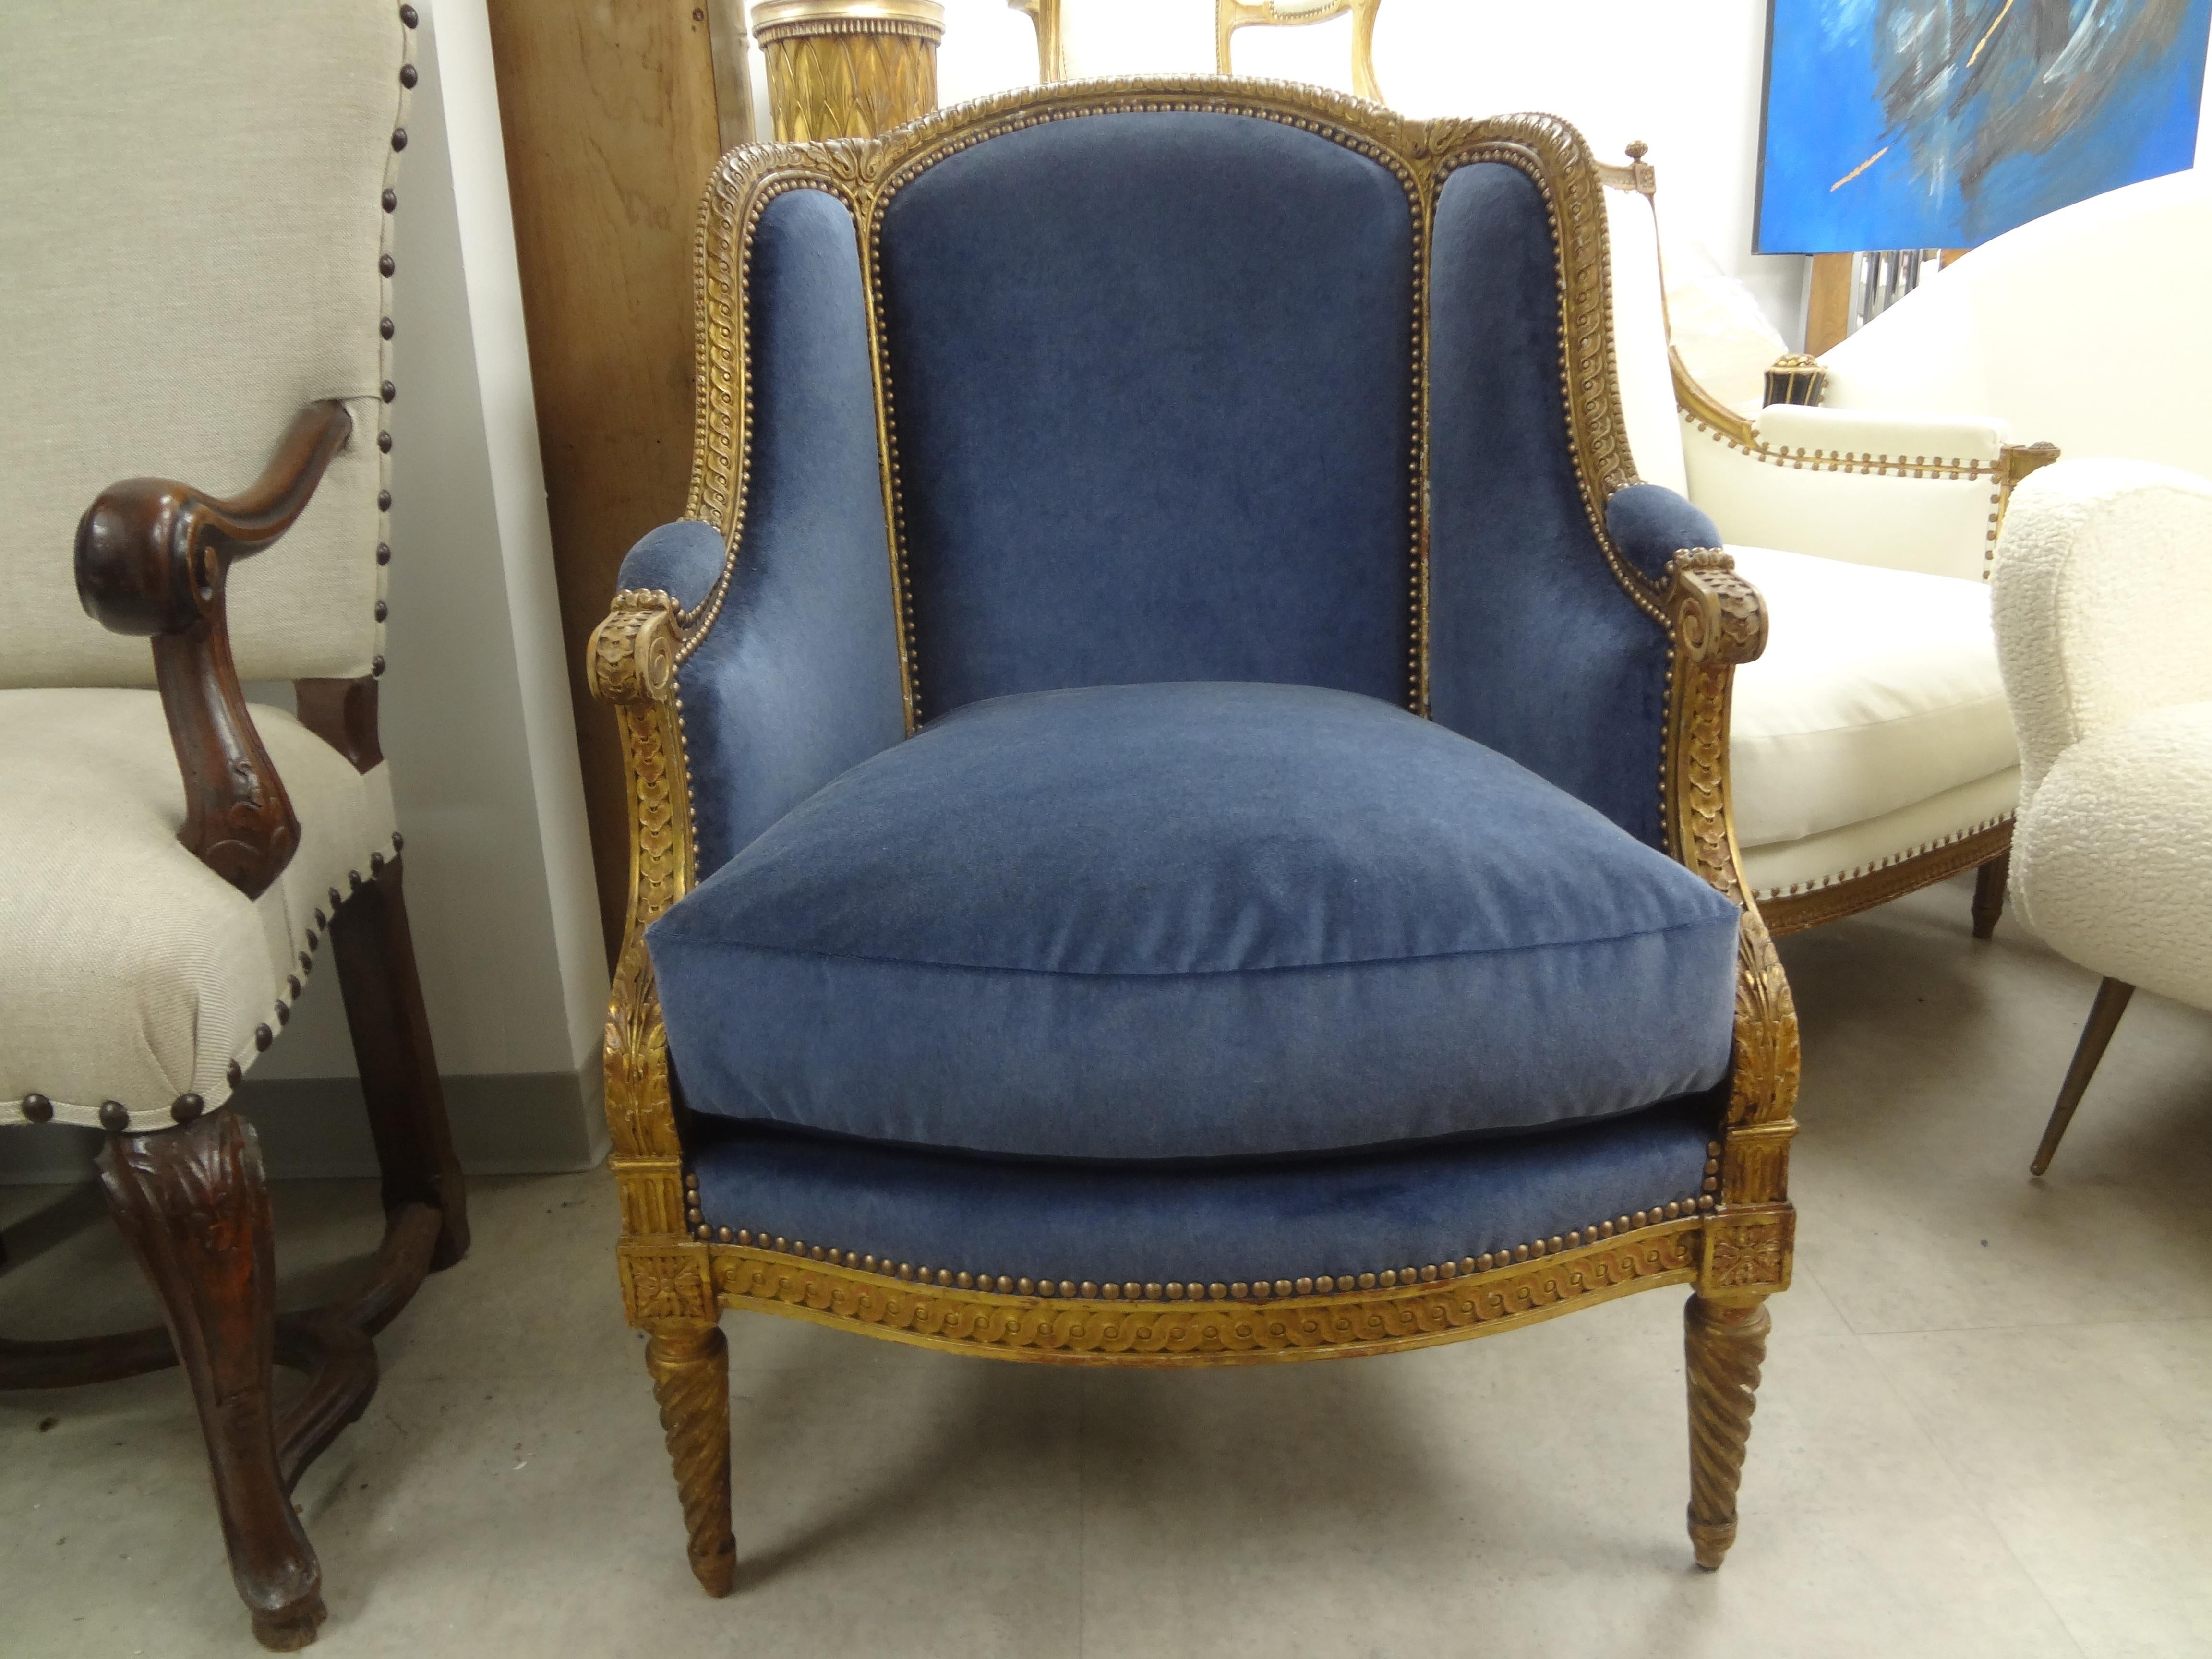 Unusual 19th century French Louis XVI style giltwood bergère from Paris. This antique French giltwood bergère has beautiful twisted legs in both front and back and is large and comfortable. This French Napoleon III gilt wood chair has been